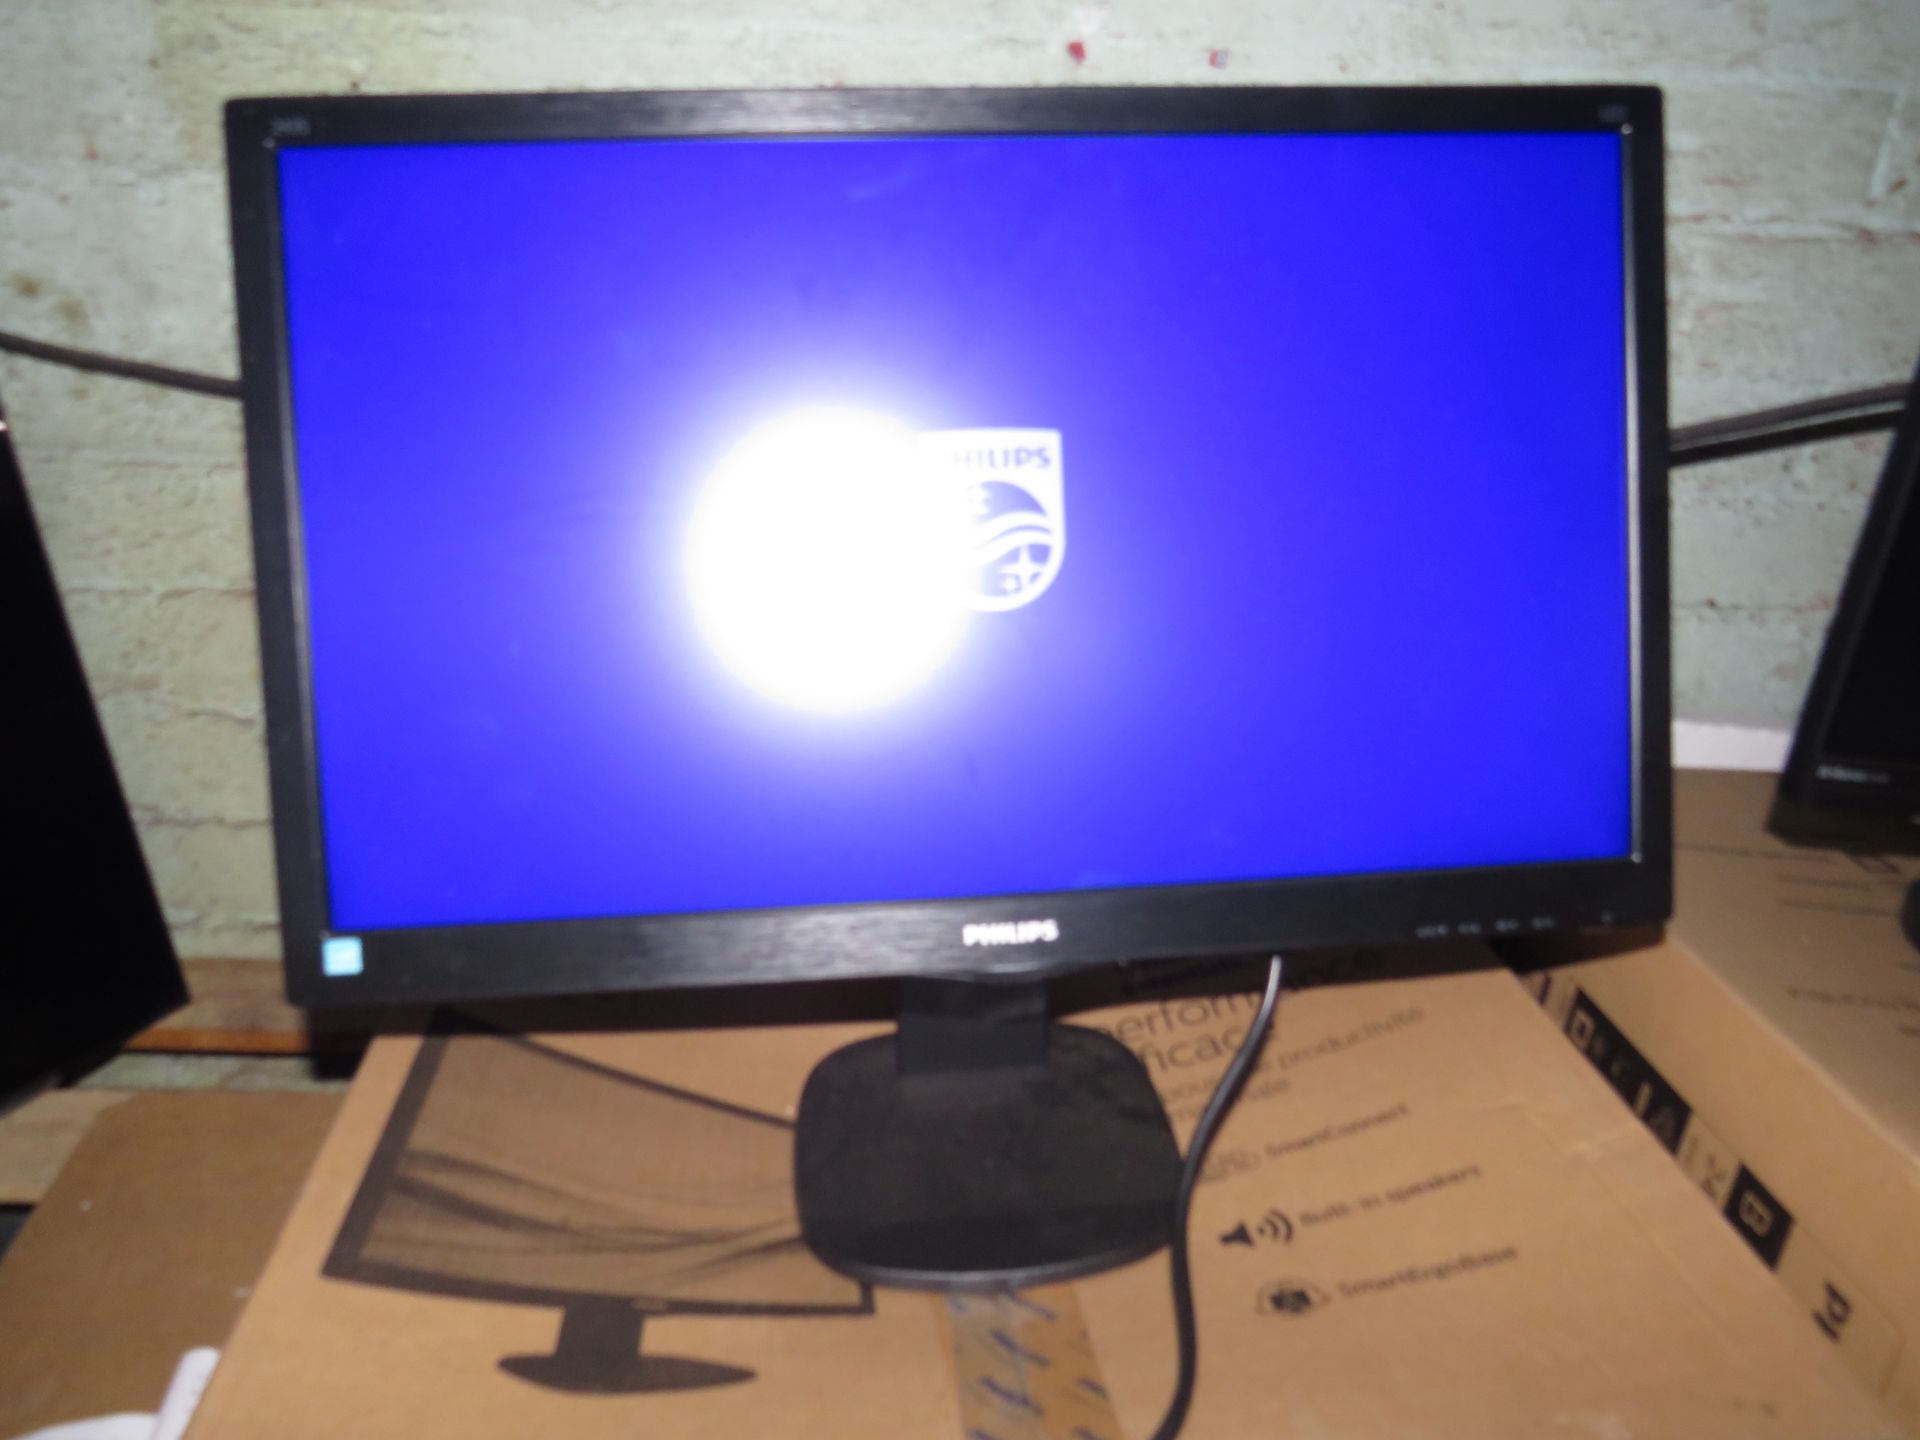 Phillips B Line 24" LCD Monitor with Full HD powers on and seems to work as designed , all cables